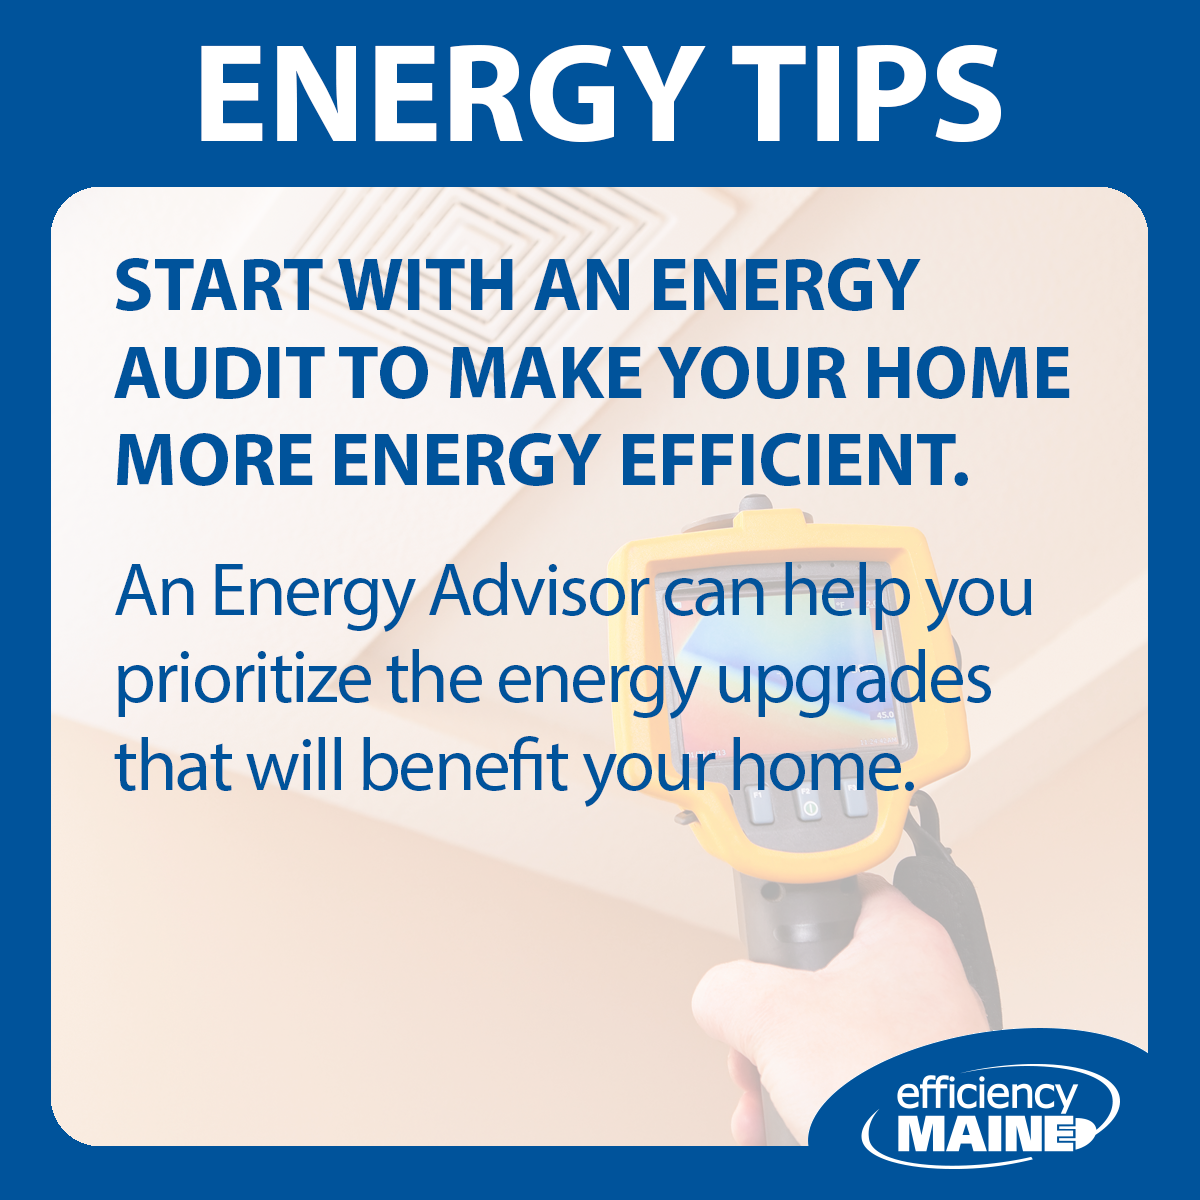 Energy Tips graphic - Start with an energy audit to improve home effciency.